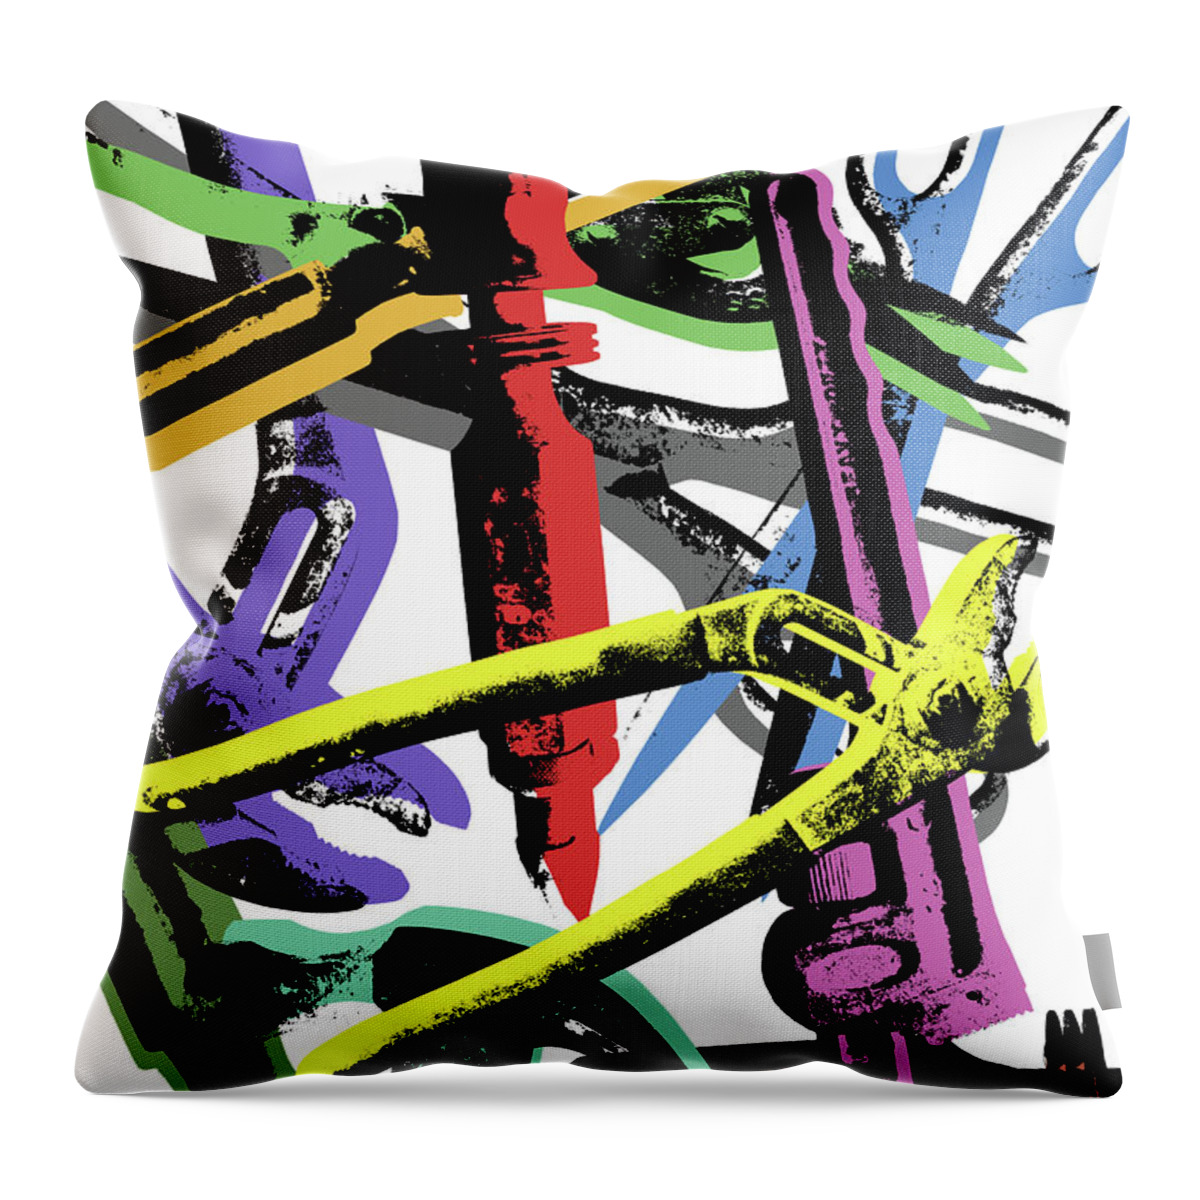 Tools Throw Pillow featuring the digital art Tools - Collage Pop Art Warhol style by Jean luc Comperat